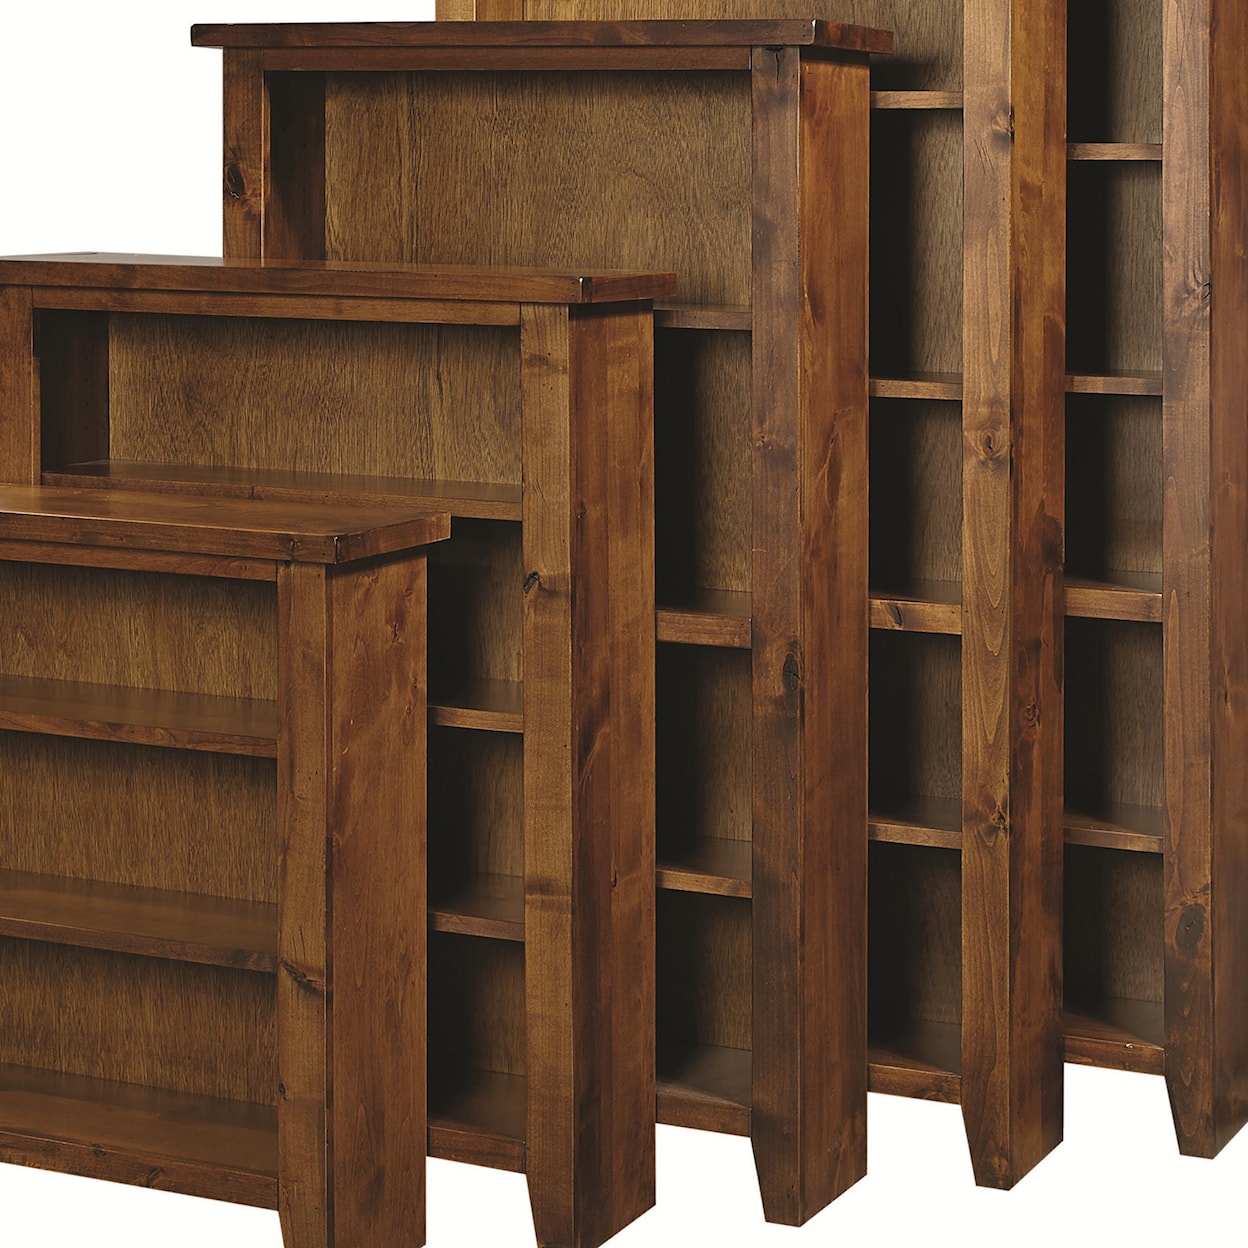 Aspenhome Alder Grove Bookcase 60" Height with 3 Shelves